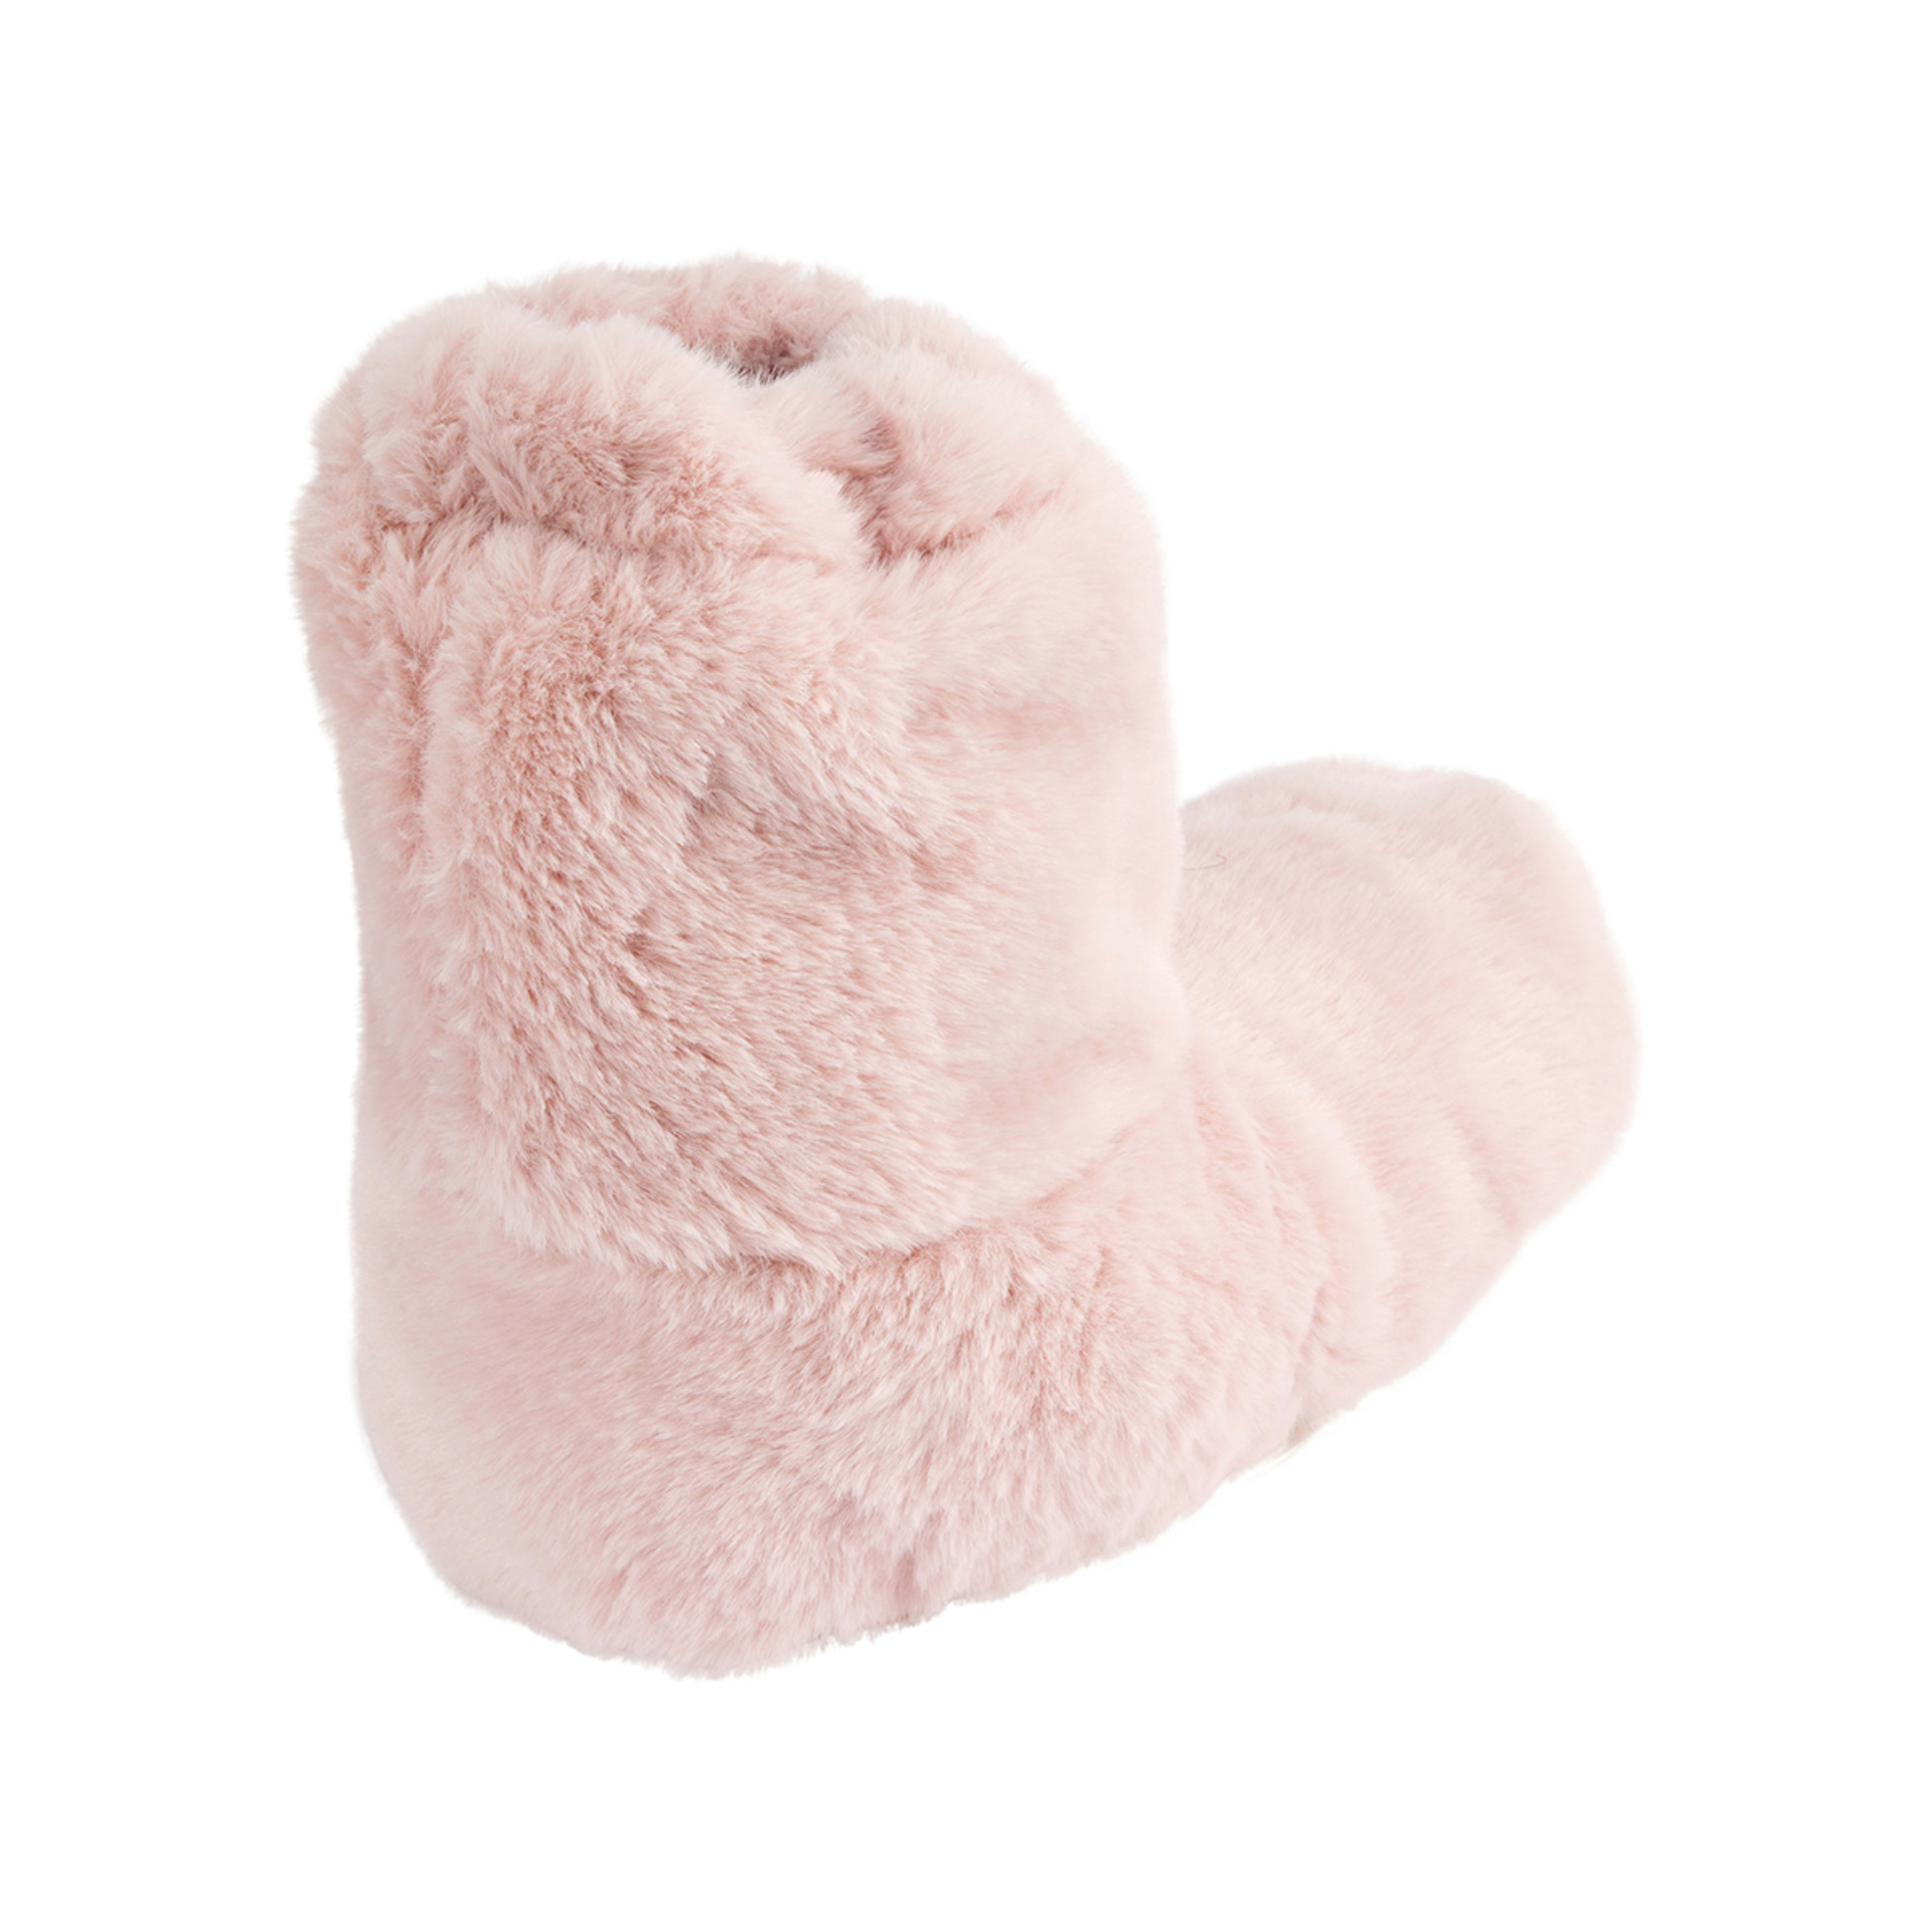 OXX Essentials Microwavable Slippers - Pink - Kmart